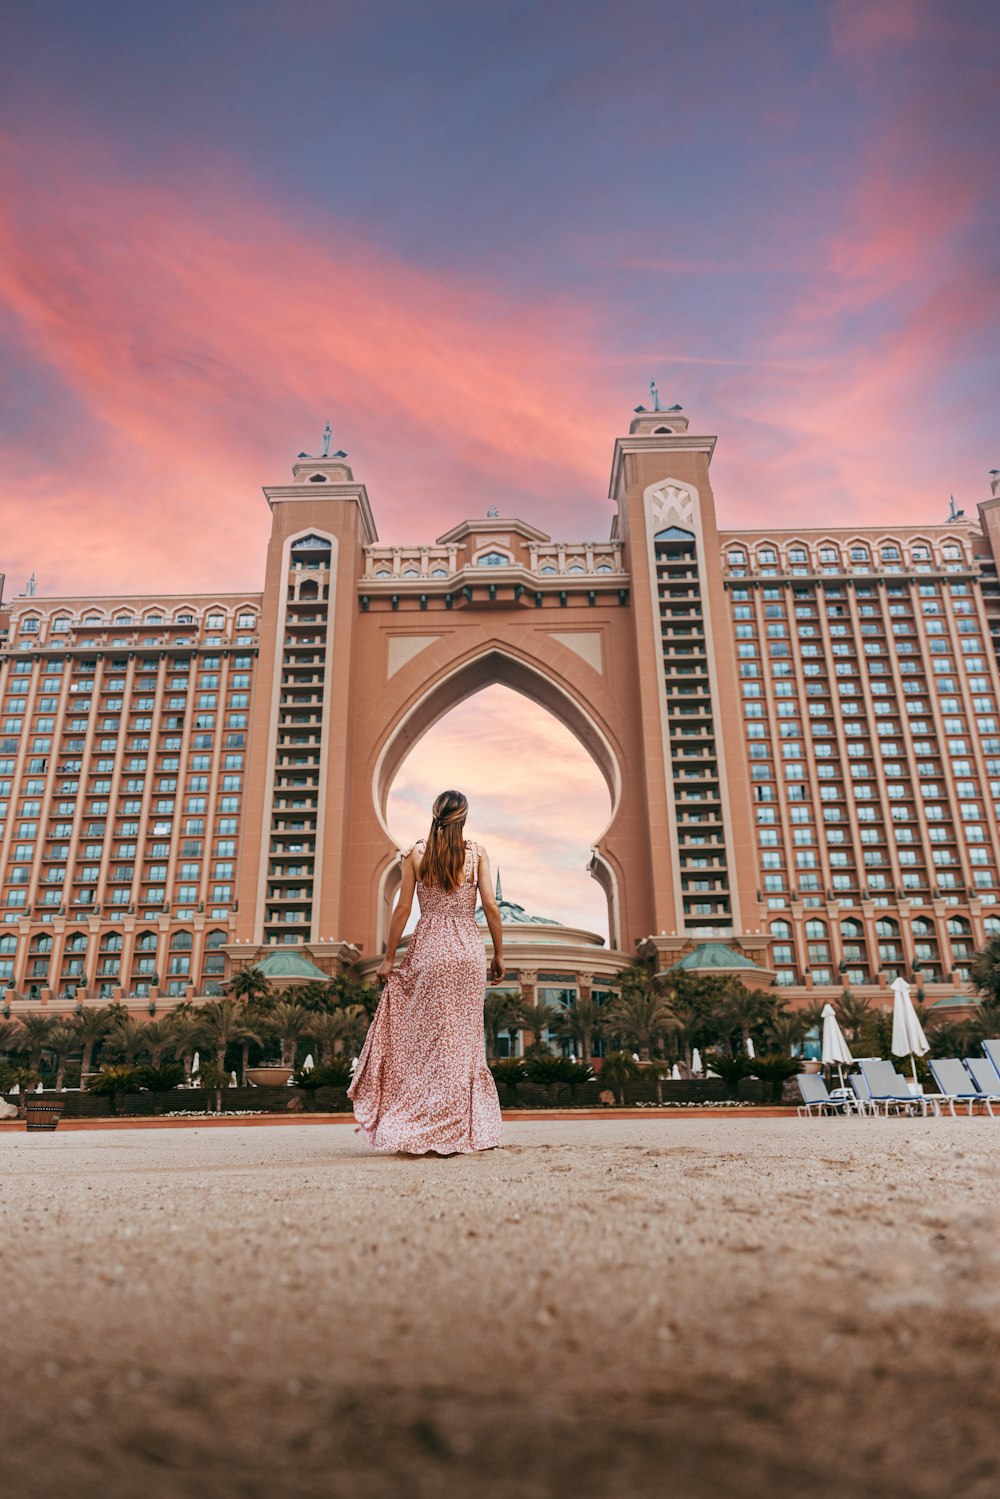 a person in a dress standing in front of a large building with Atlantis, The Palm in the background